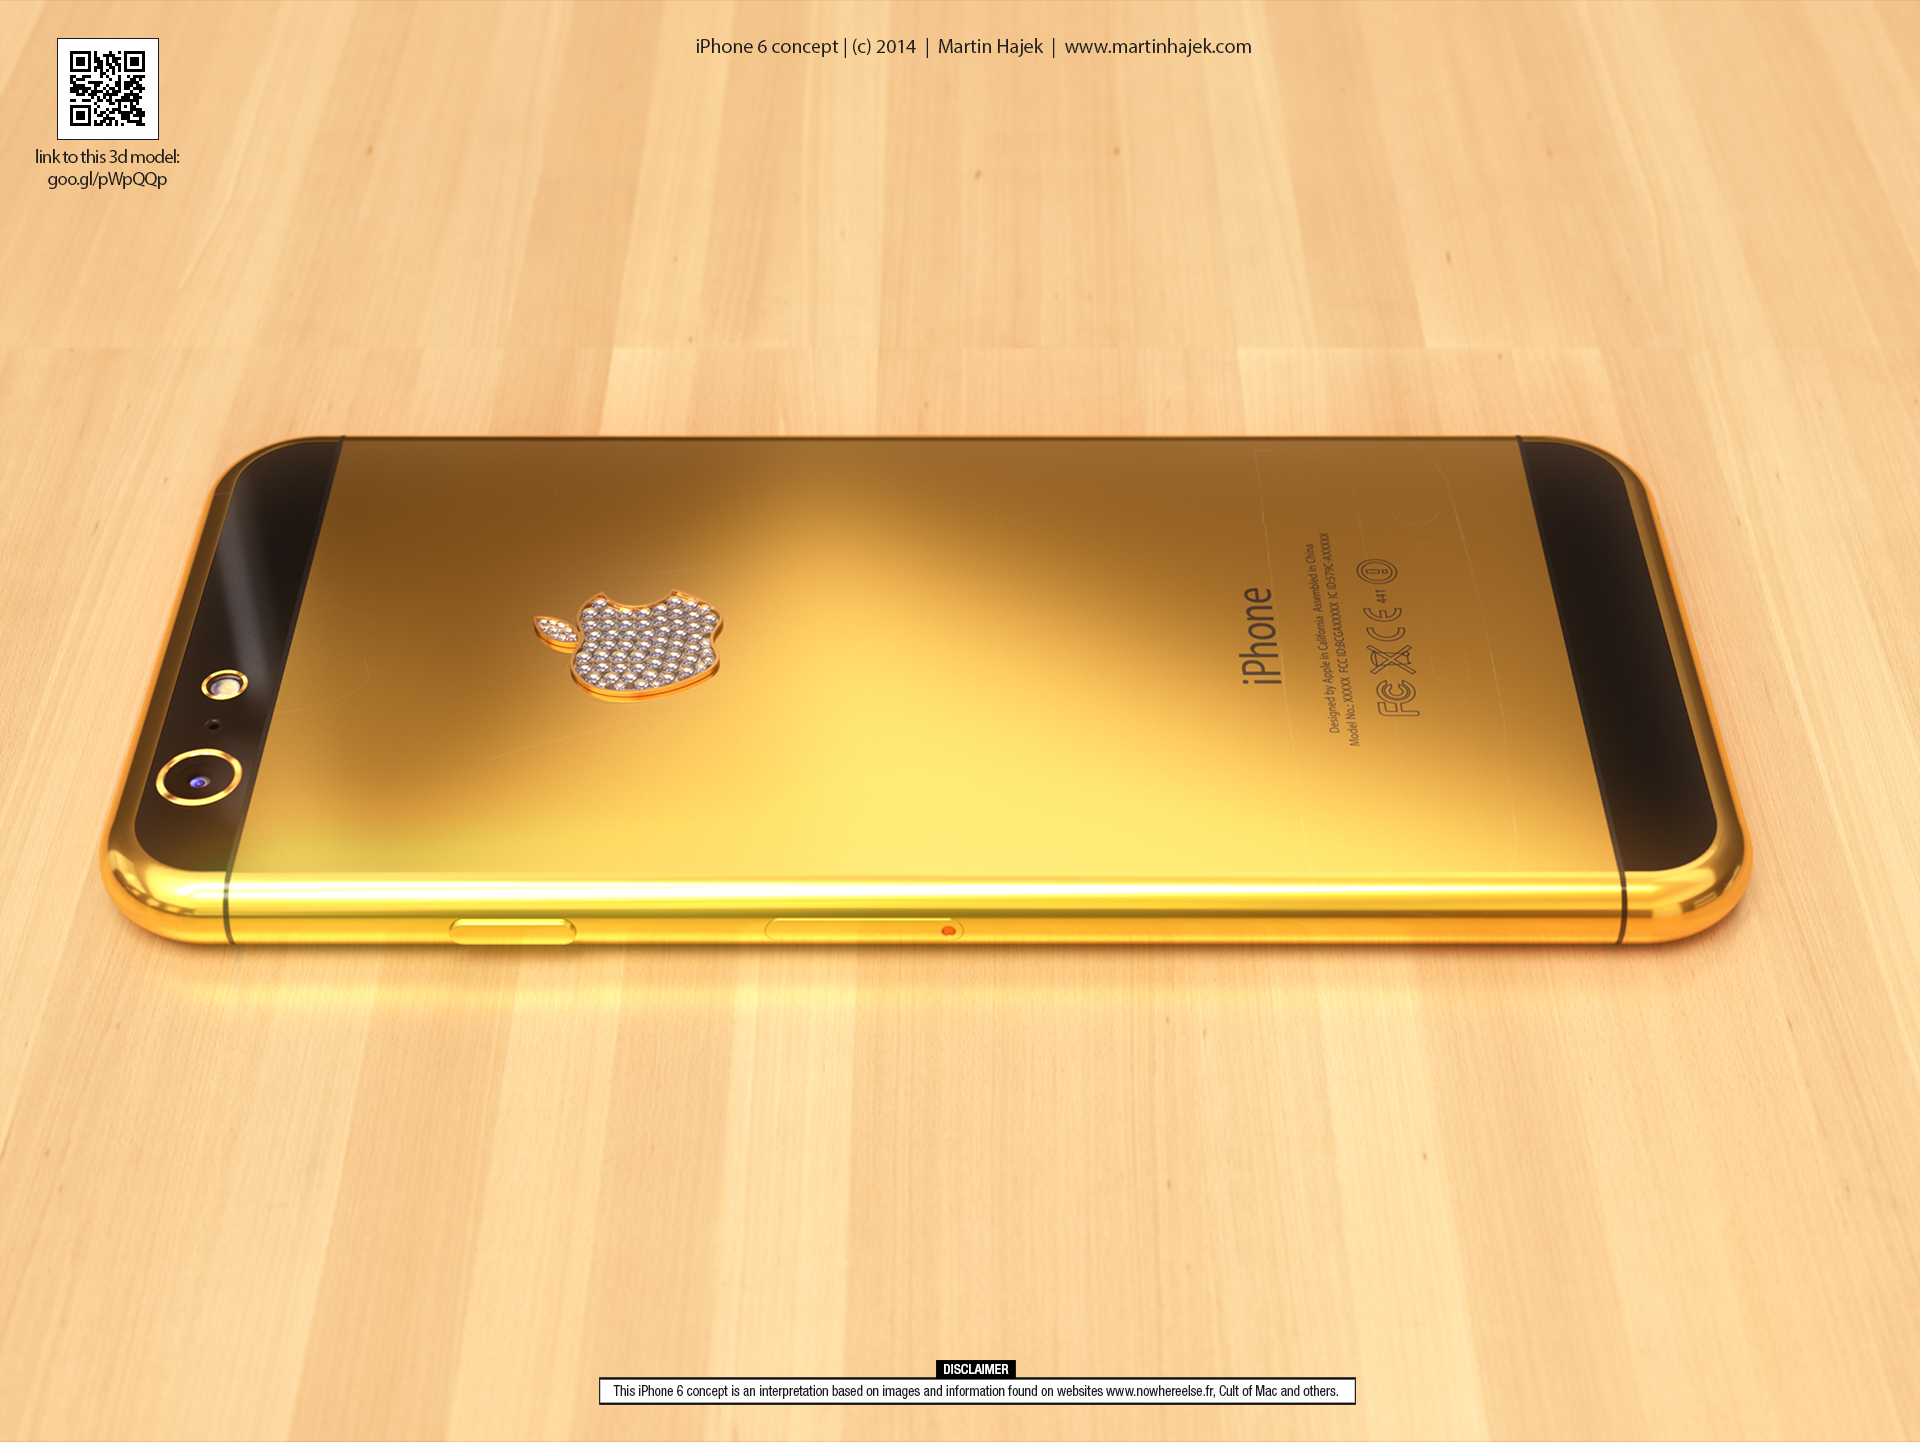 Gold mobile. Iphone 6 Gold. Айфон 6 золотой. Iphone 6 Plus Gold. Iphone 6s золотистый.